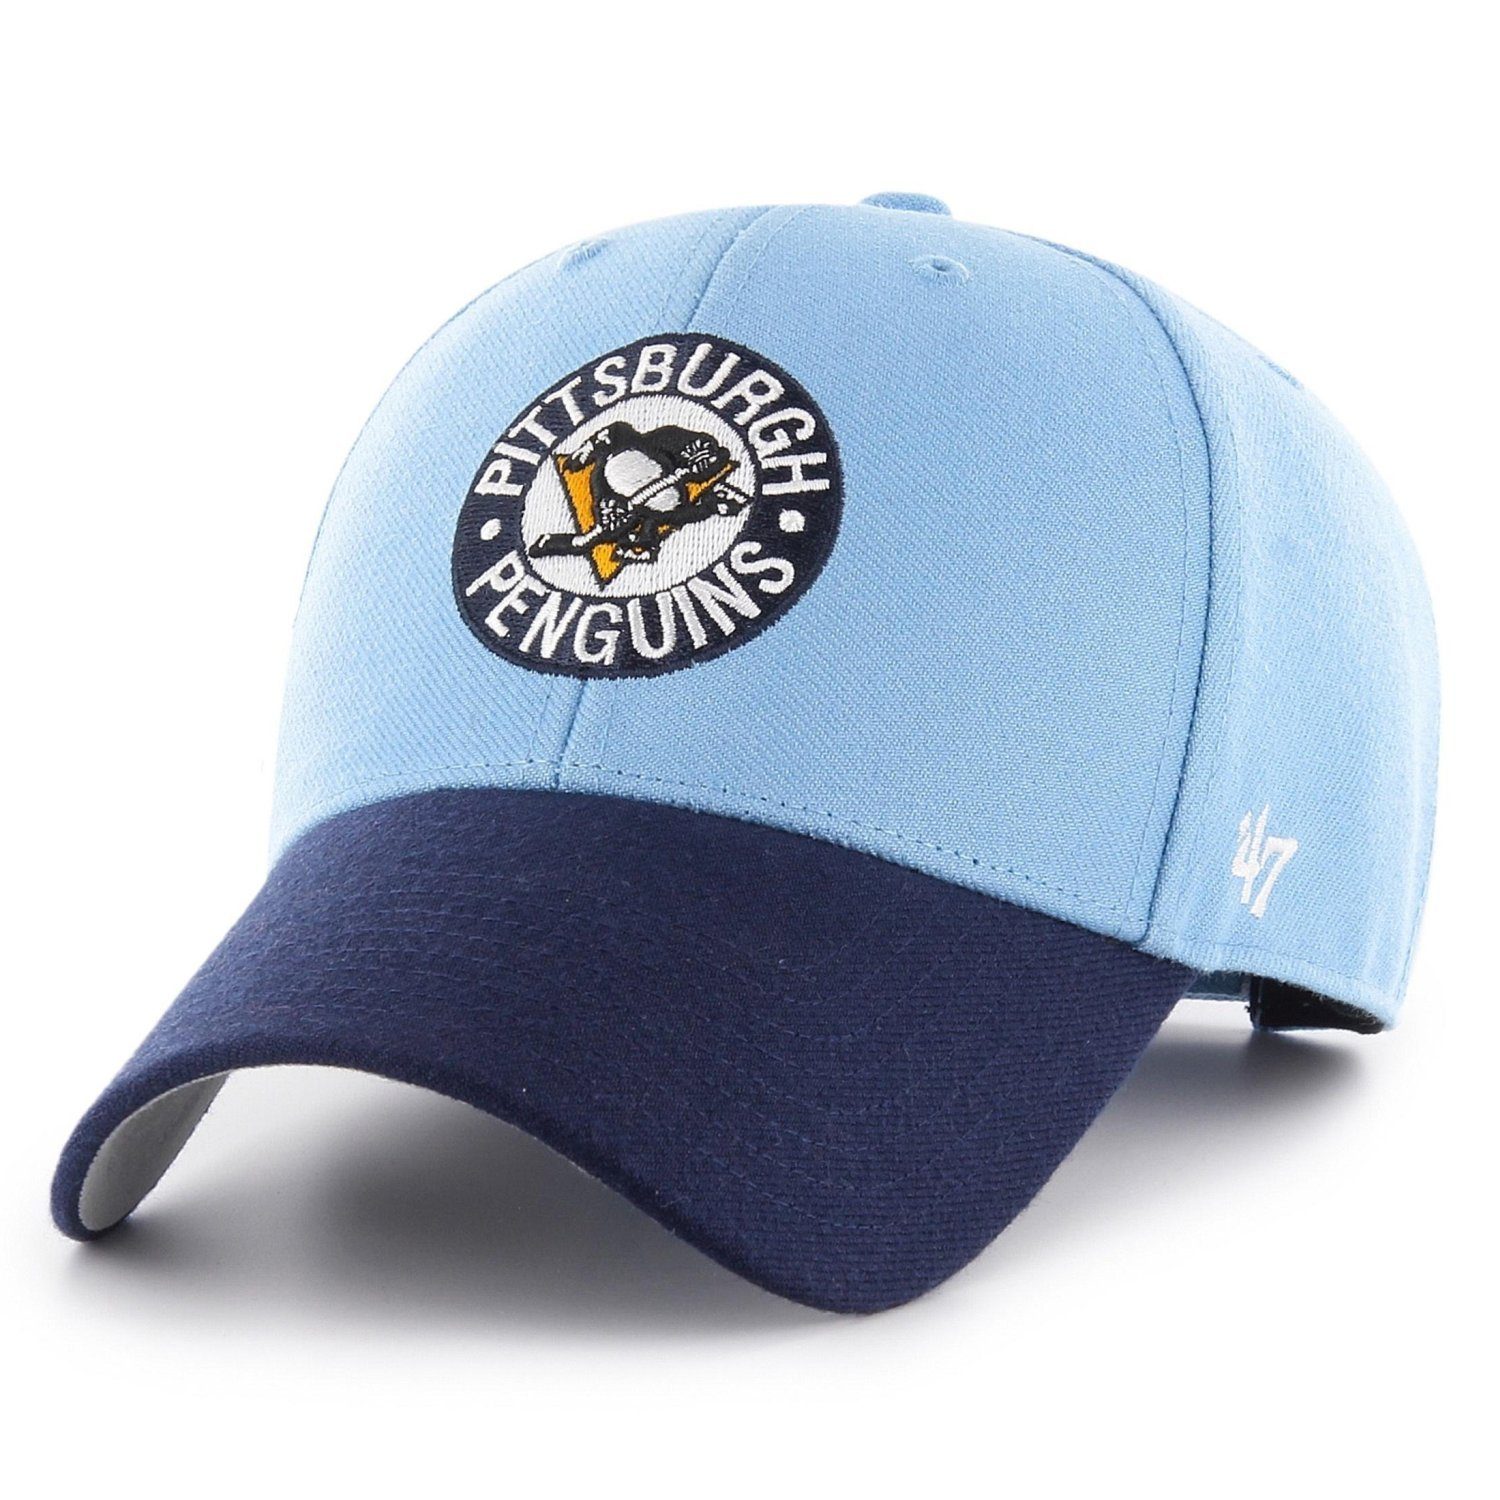 '47 Brand Trucker Cap Relaxed Fit NHL Pittsburgh Penguins